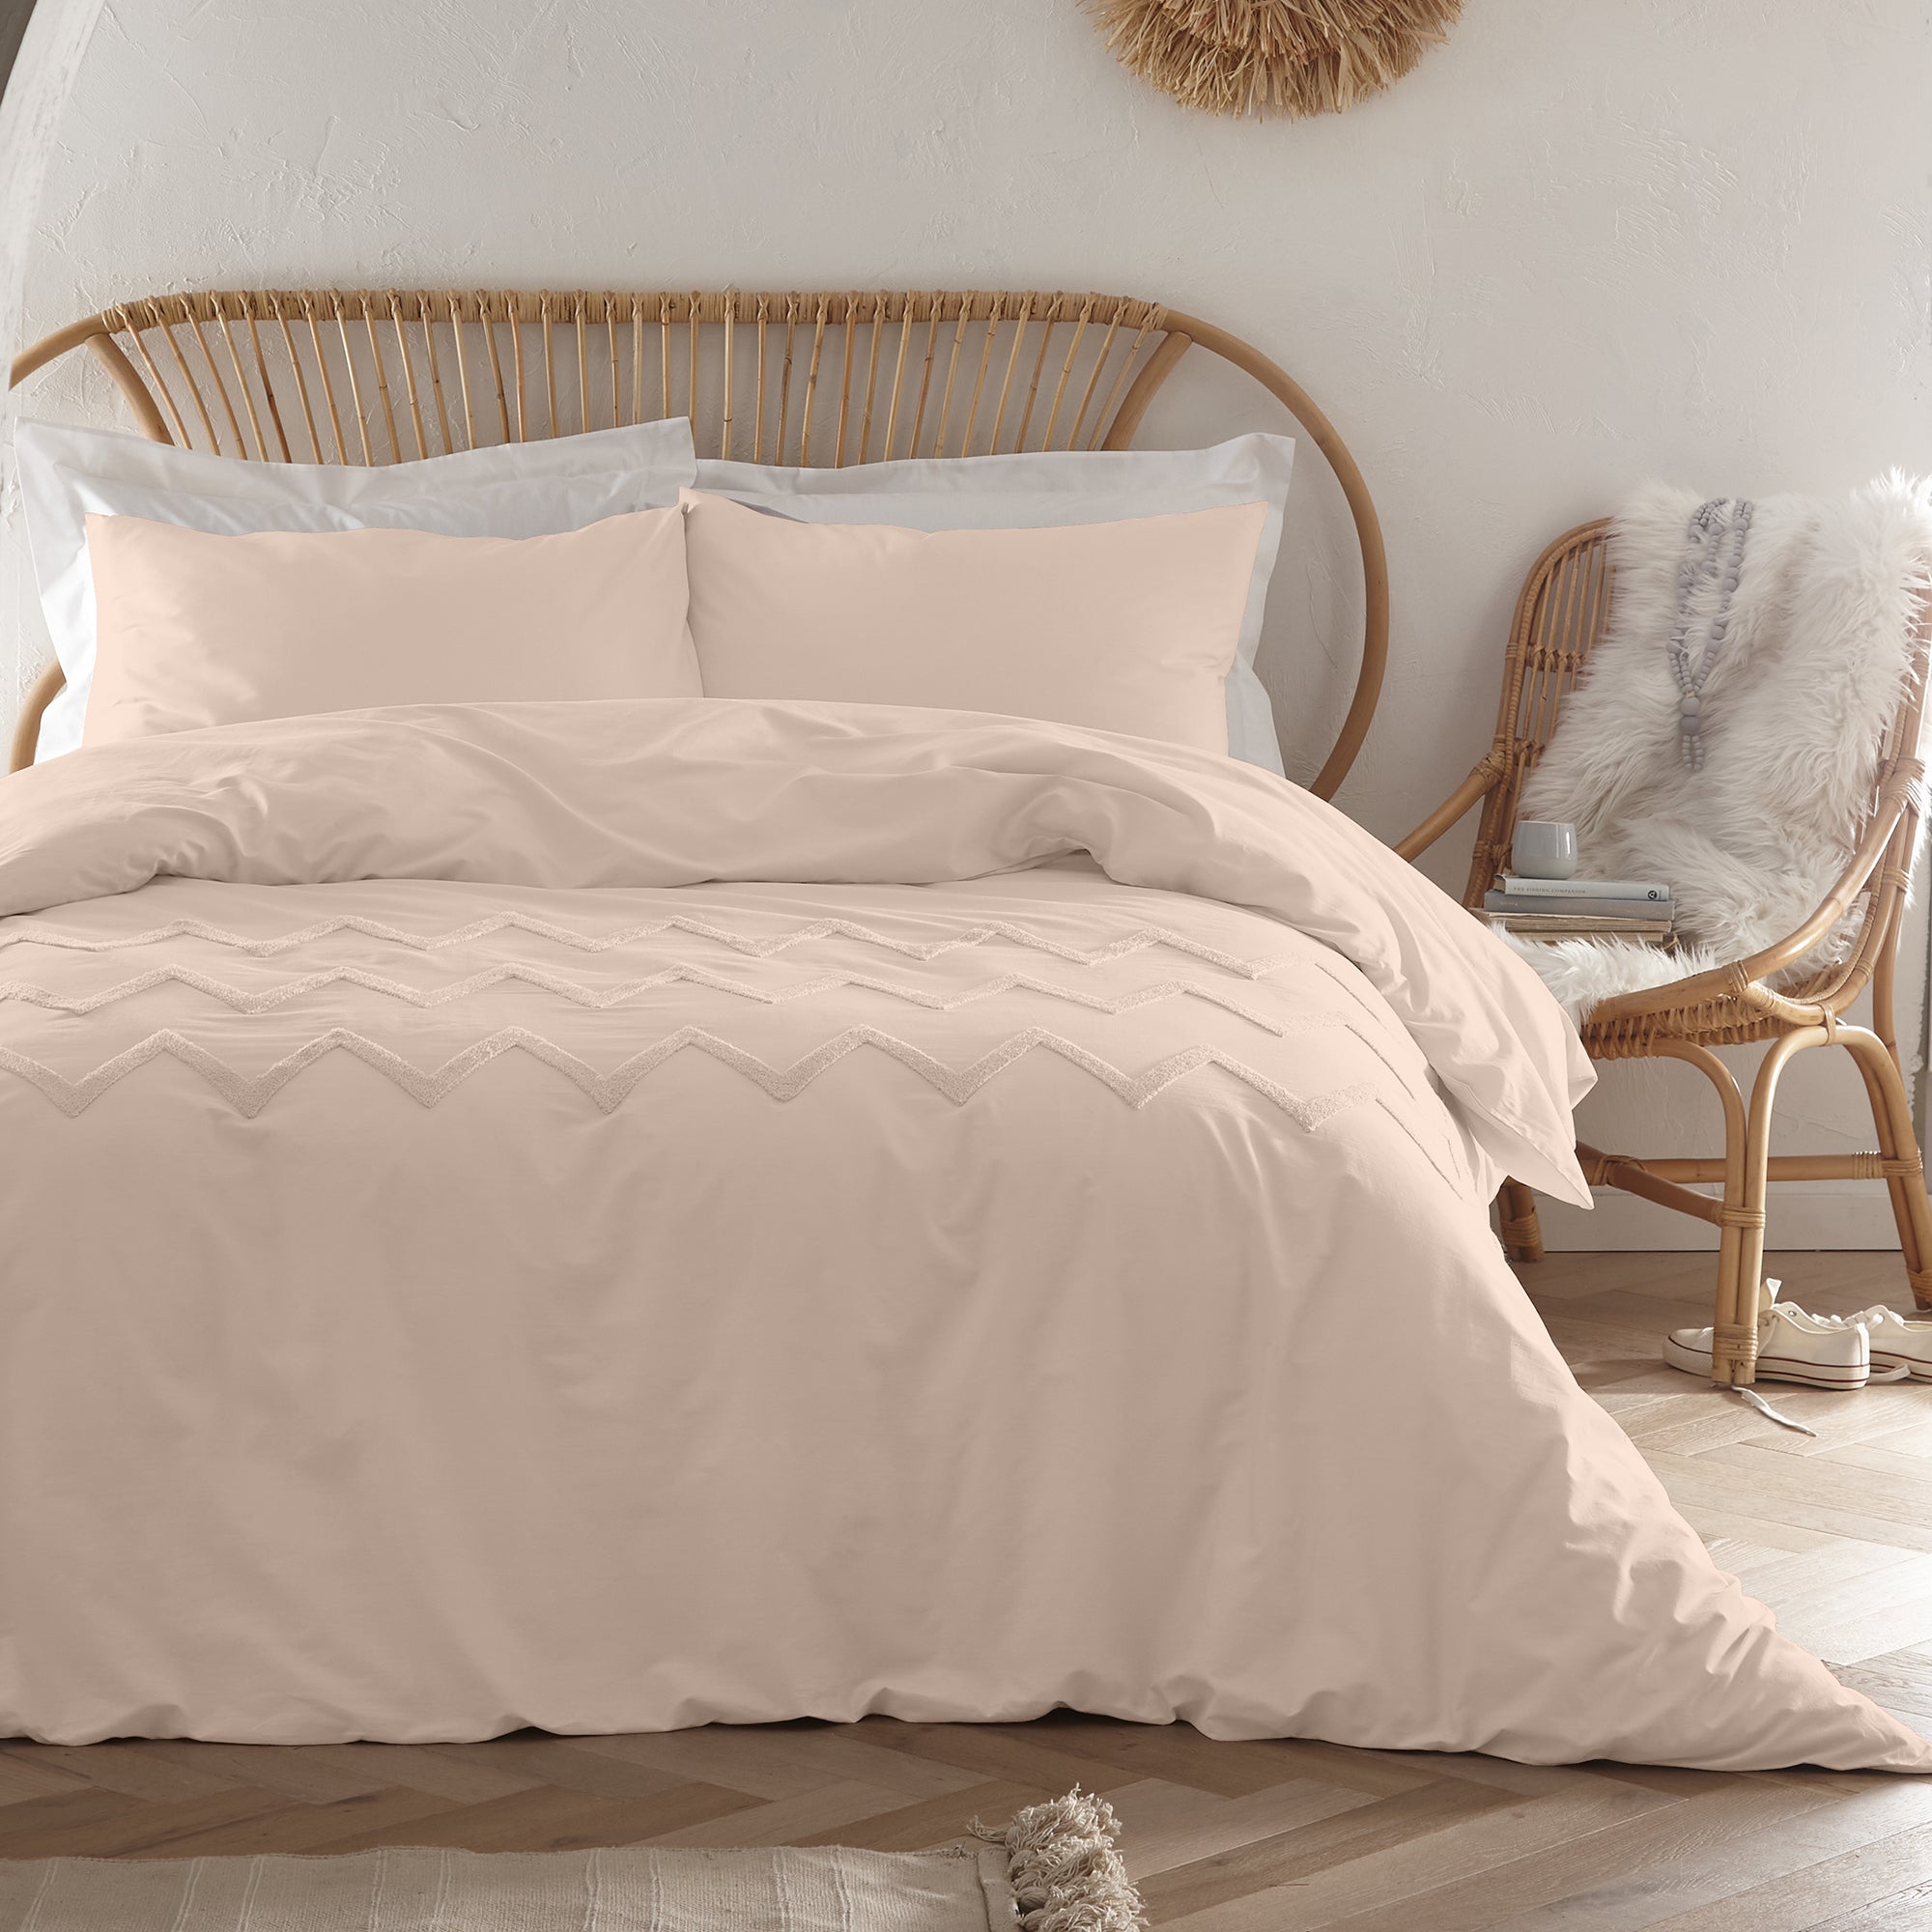 Chevron Tuft - Tufted 100% Cotton Duvet Cover Set in Blush - by Appletree Boutique